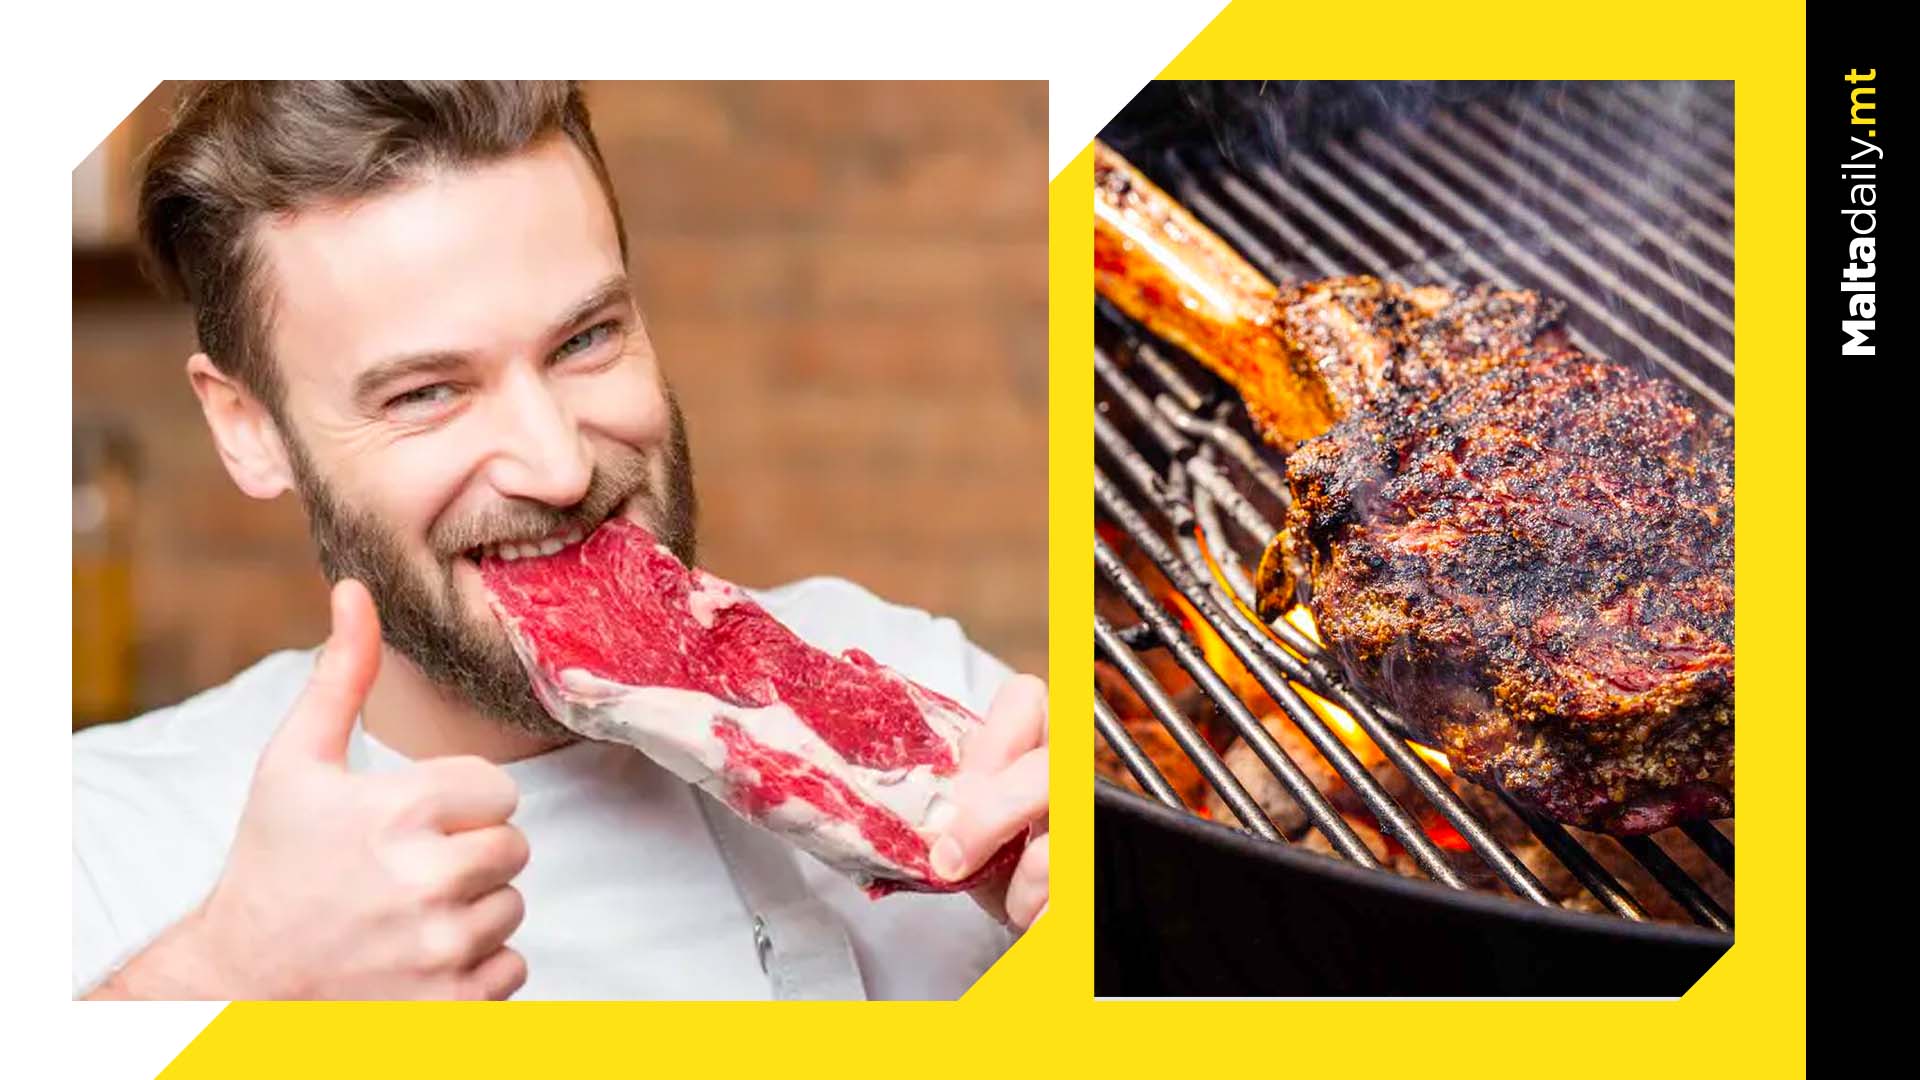 New study backs idea that men resist giving up meat to maintain masculinity